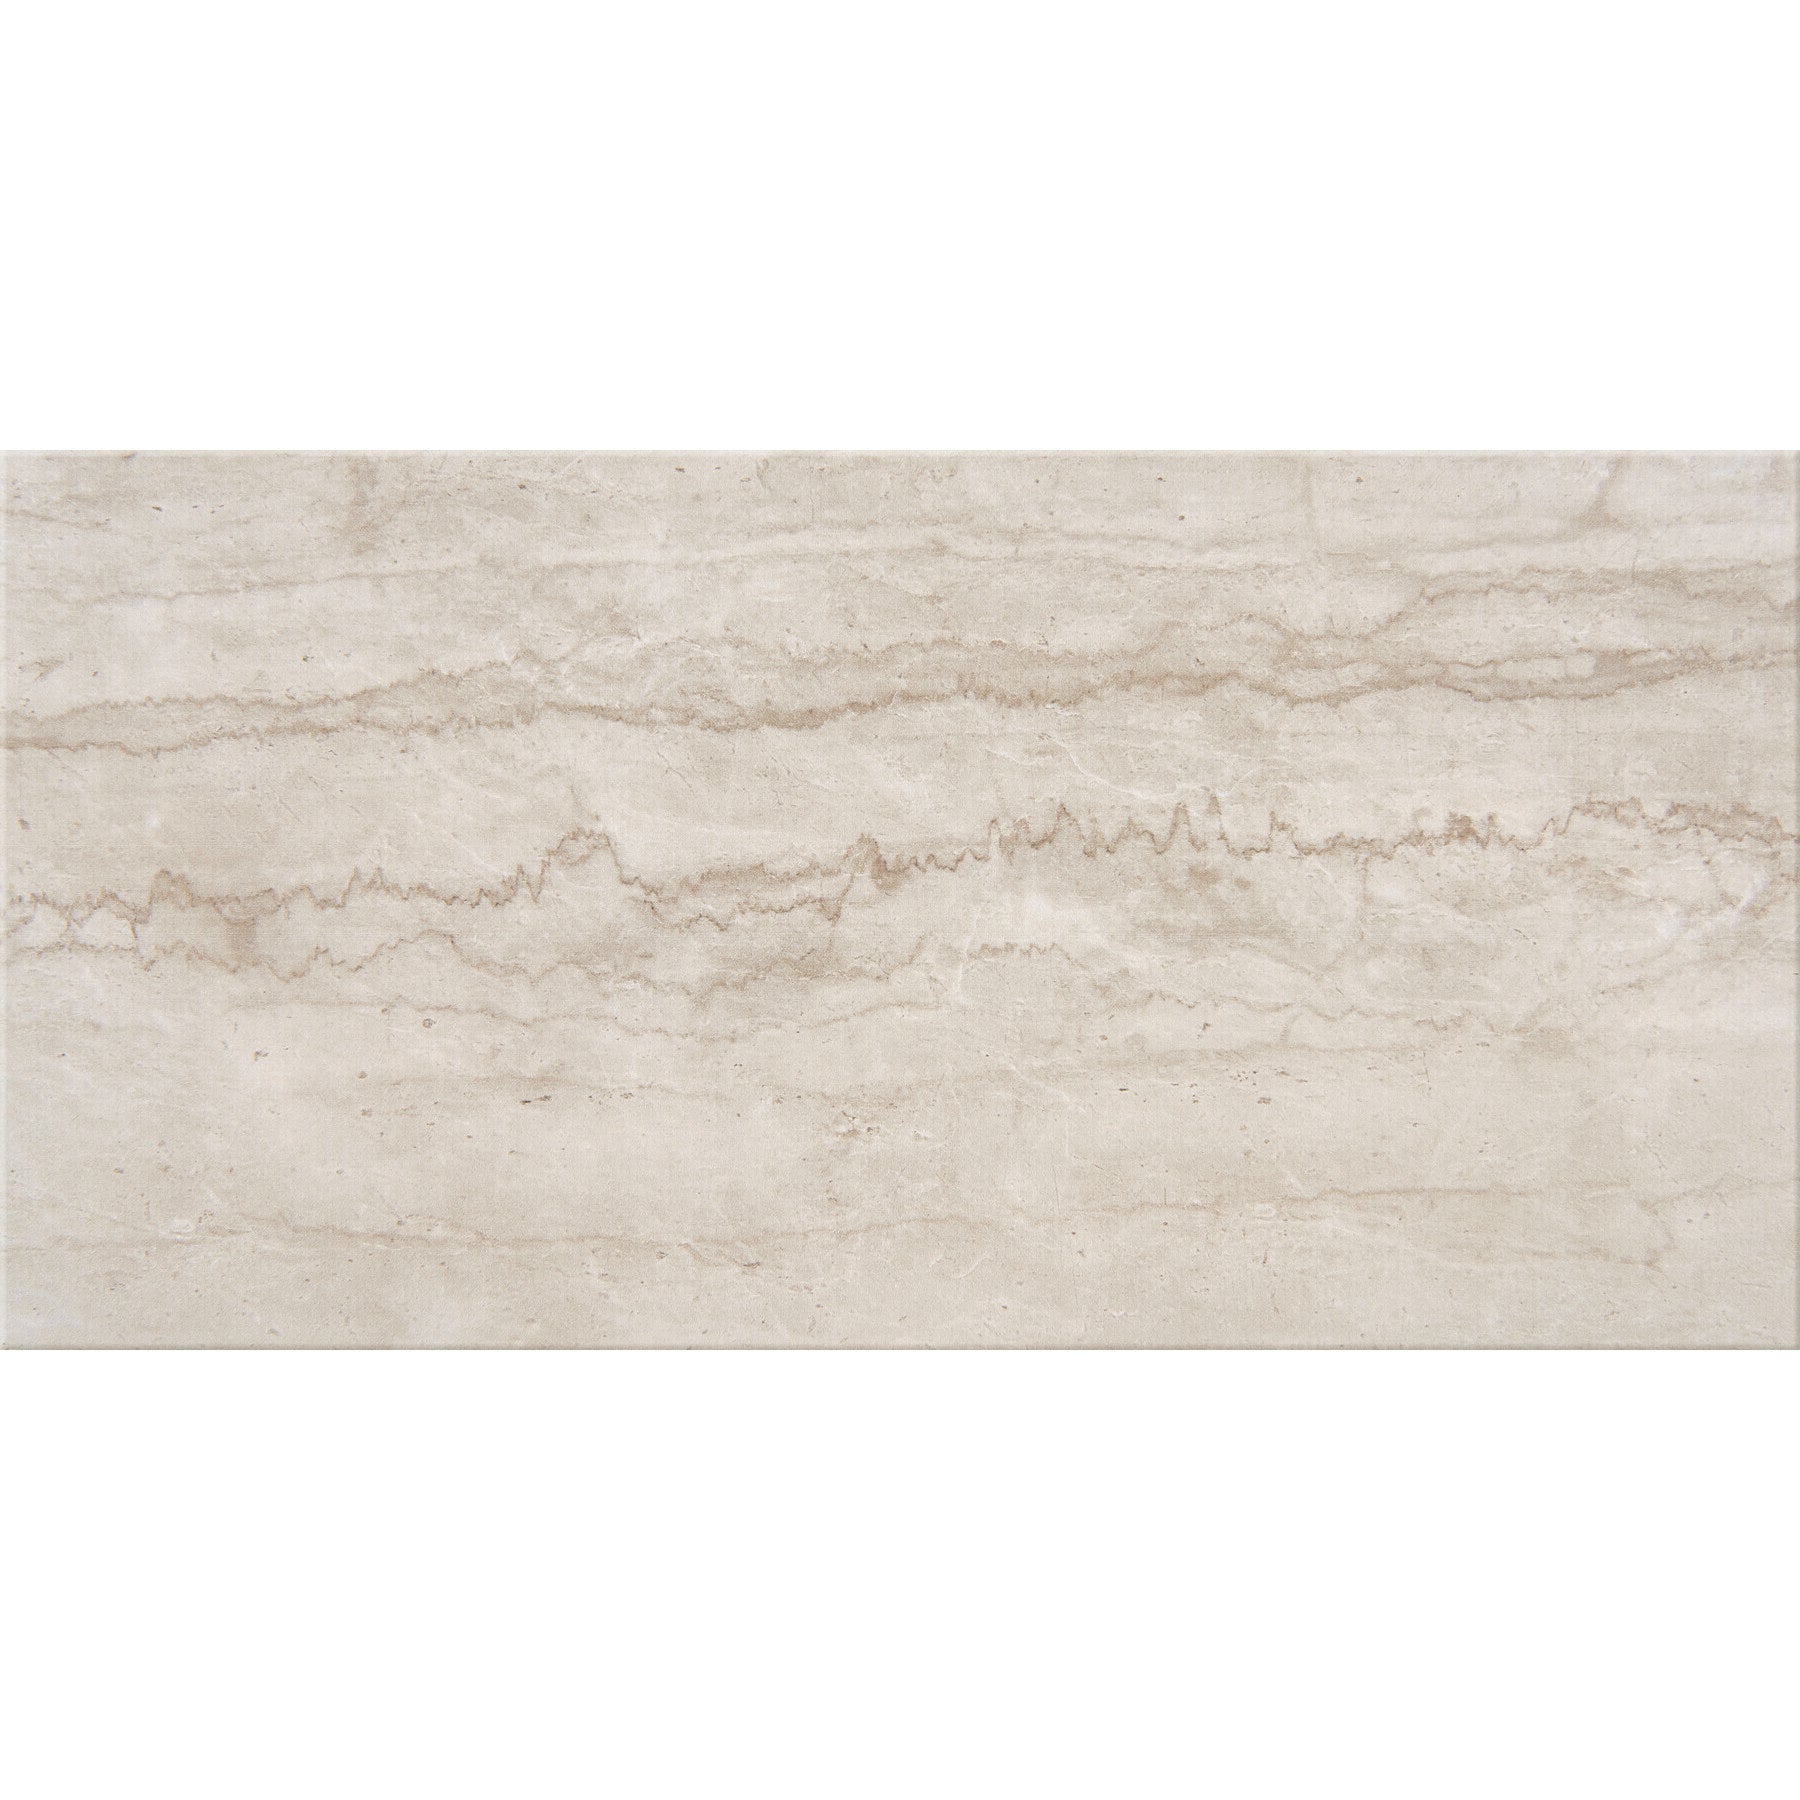 American Olean - Mythique Marble 12 in. x 24 in. Colorbody Porcelain Tile - Botticino Matte